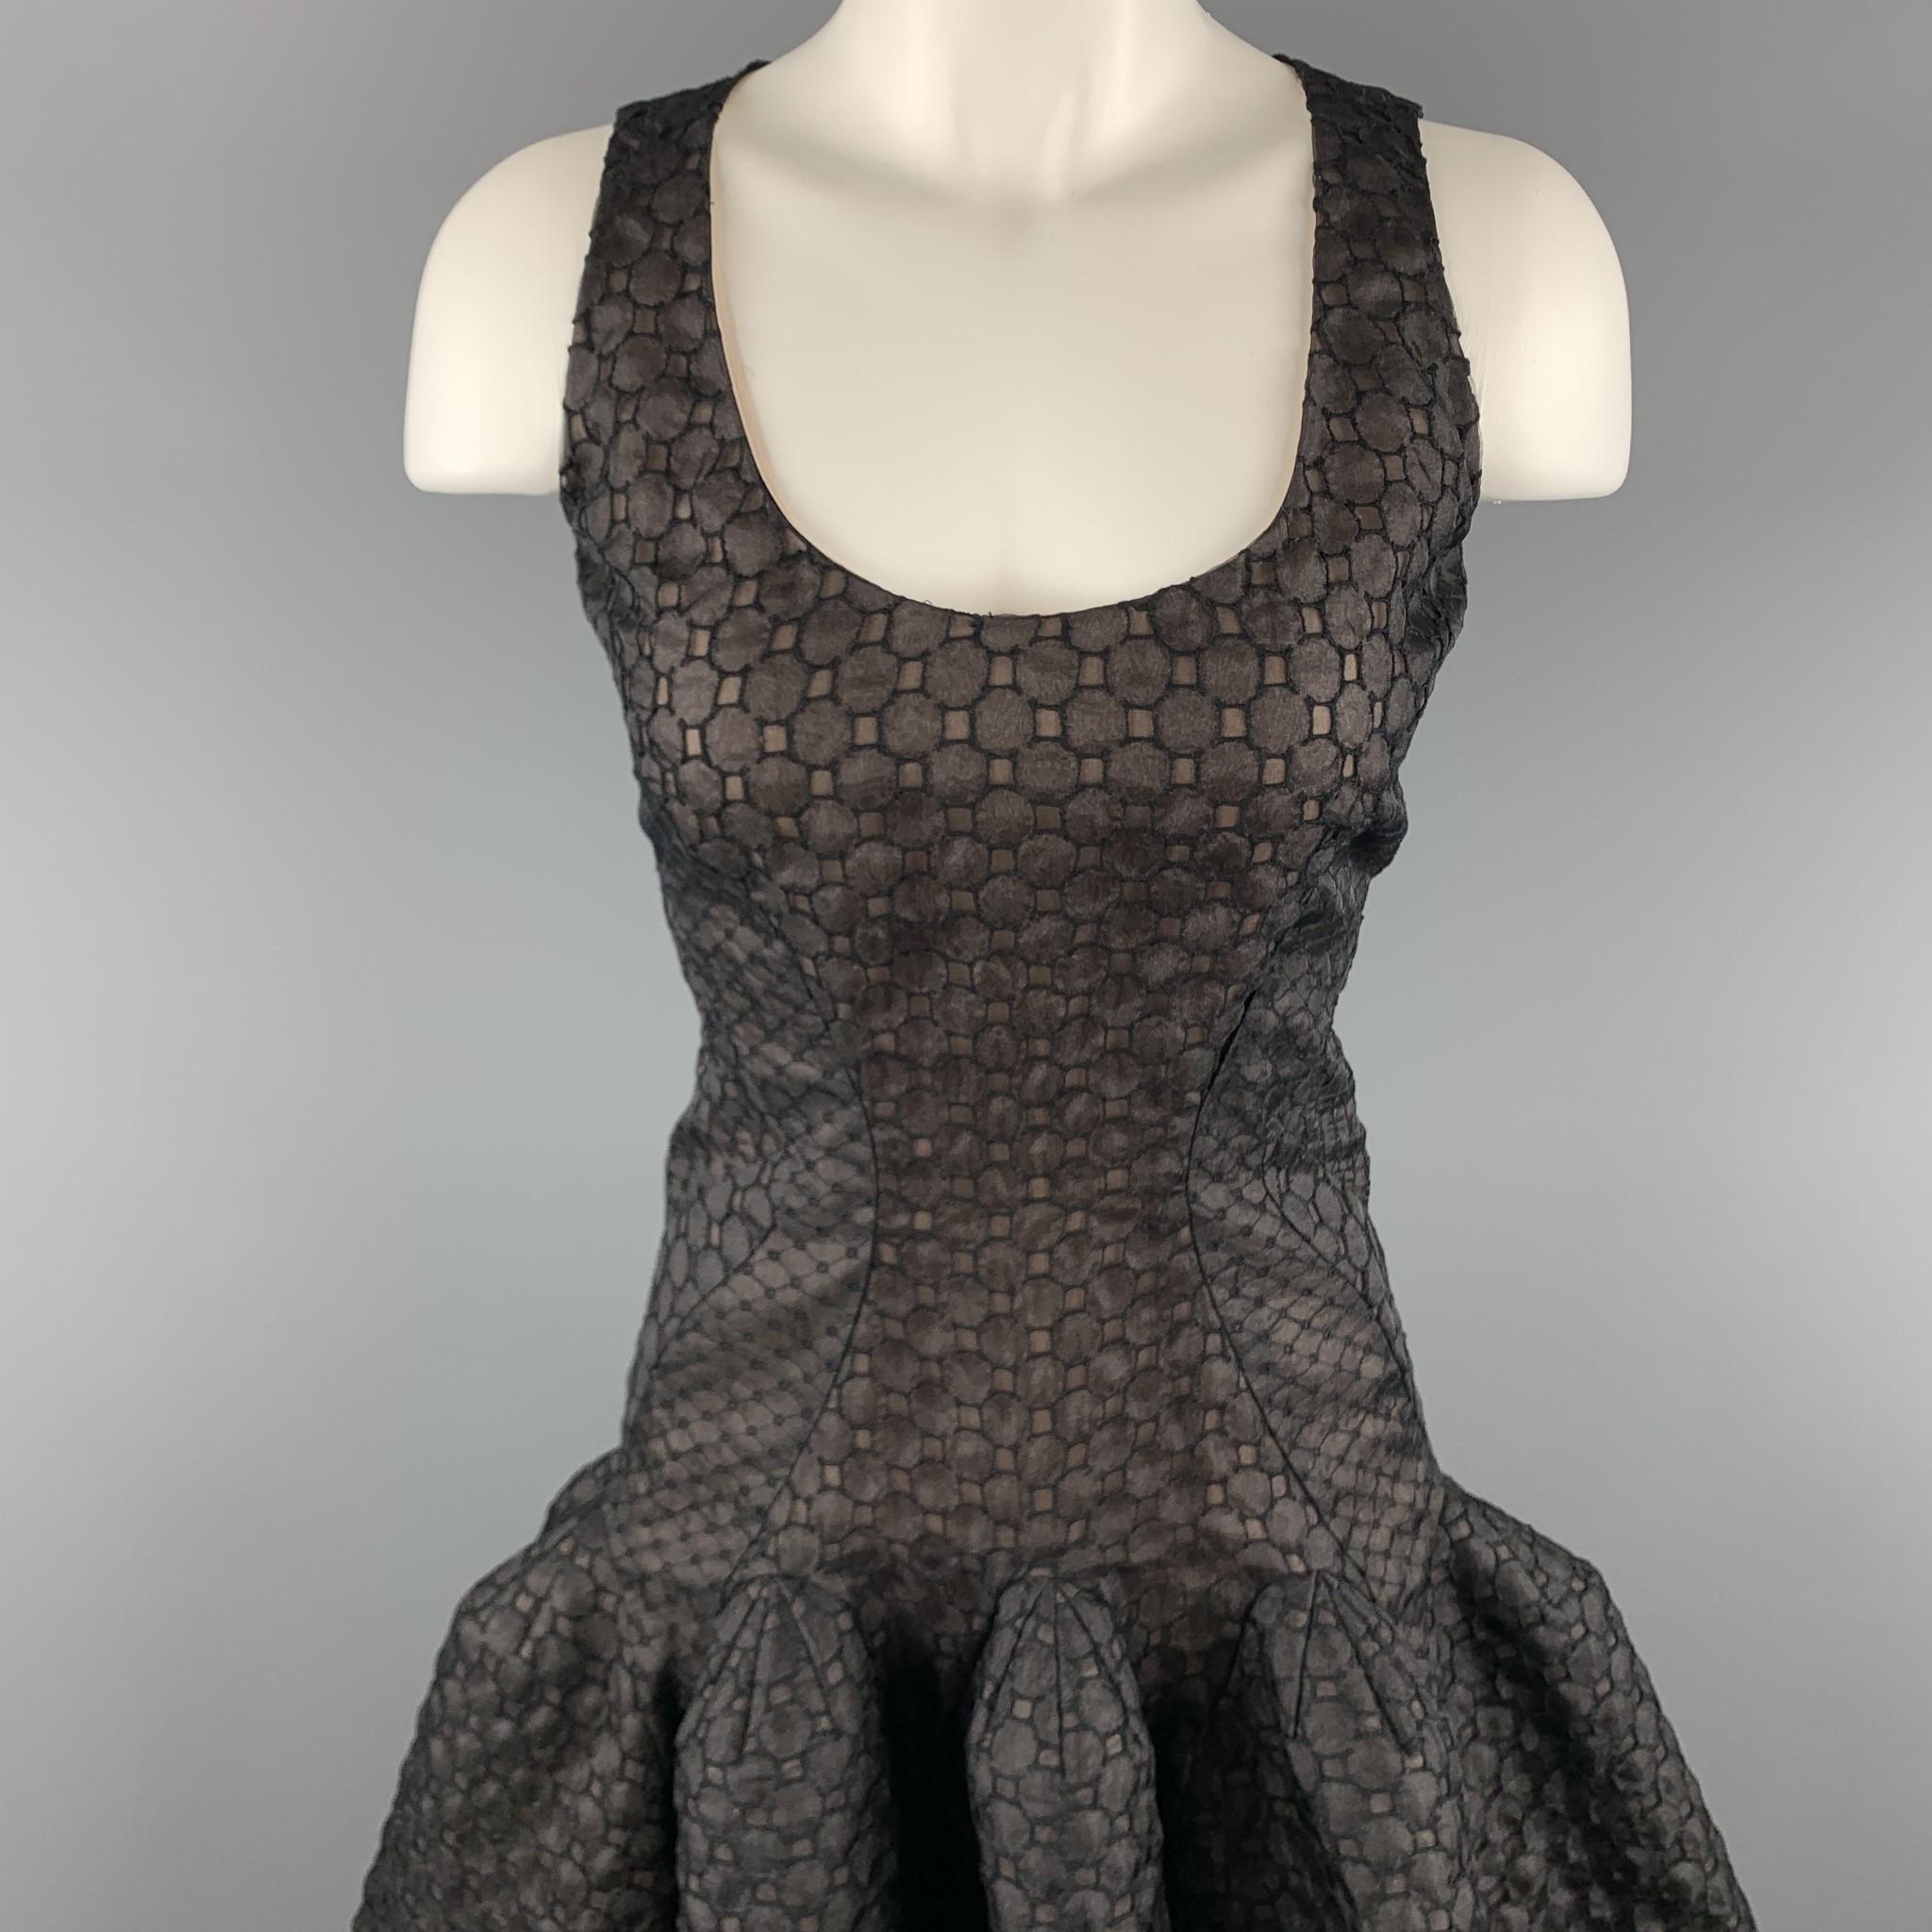 ZAC POSEN cocktail dress comes in black lace with a beige liner and features a scoop neckline, sleeveless thick strap bodice top, fitted body, and structured ruffle cropped trumpet skirt. Made in USA.

Excellent Pre-Owned Condition.
Marked: